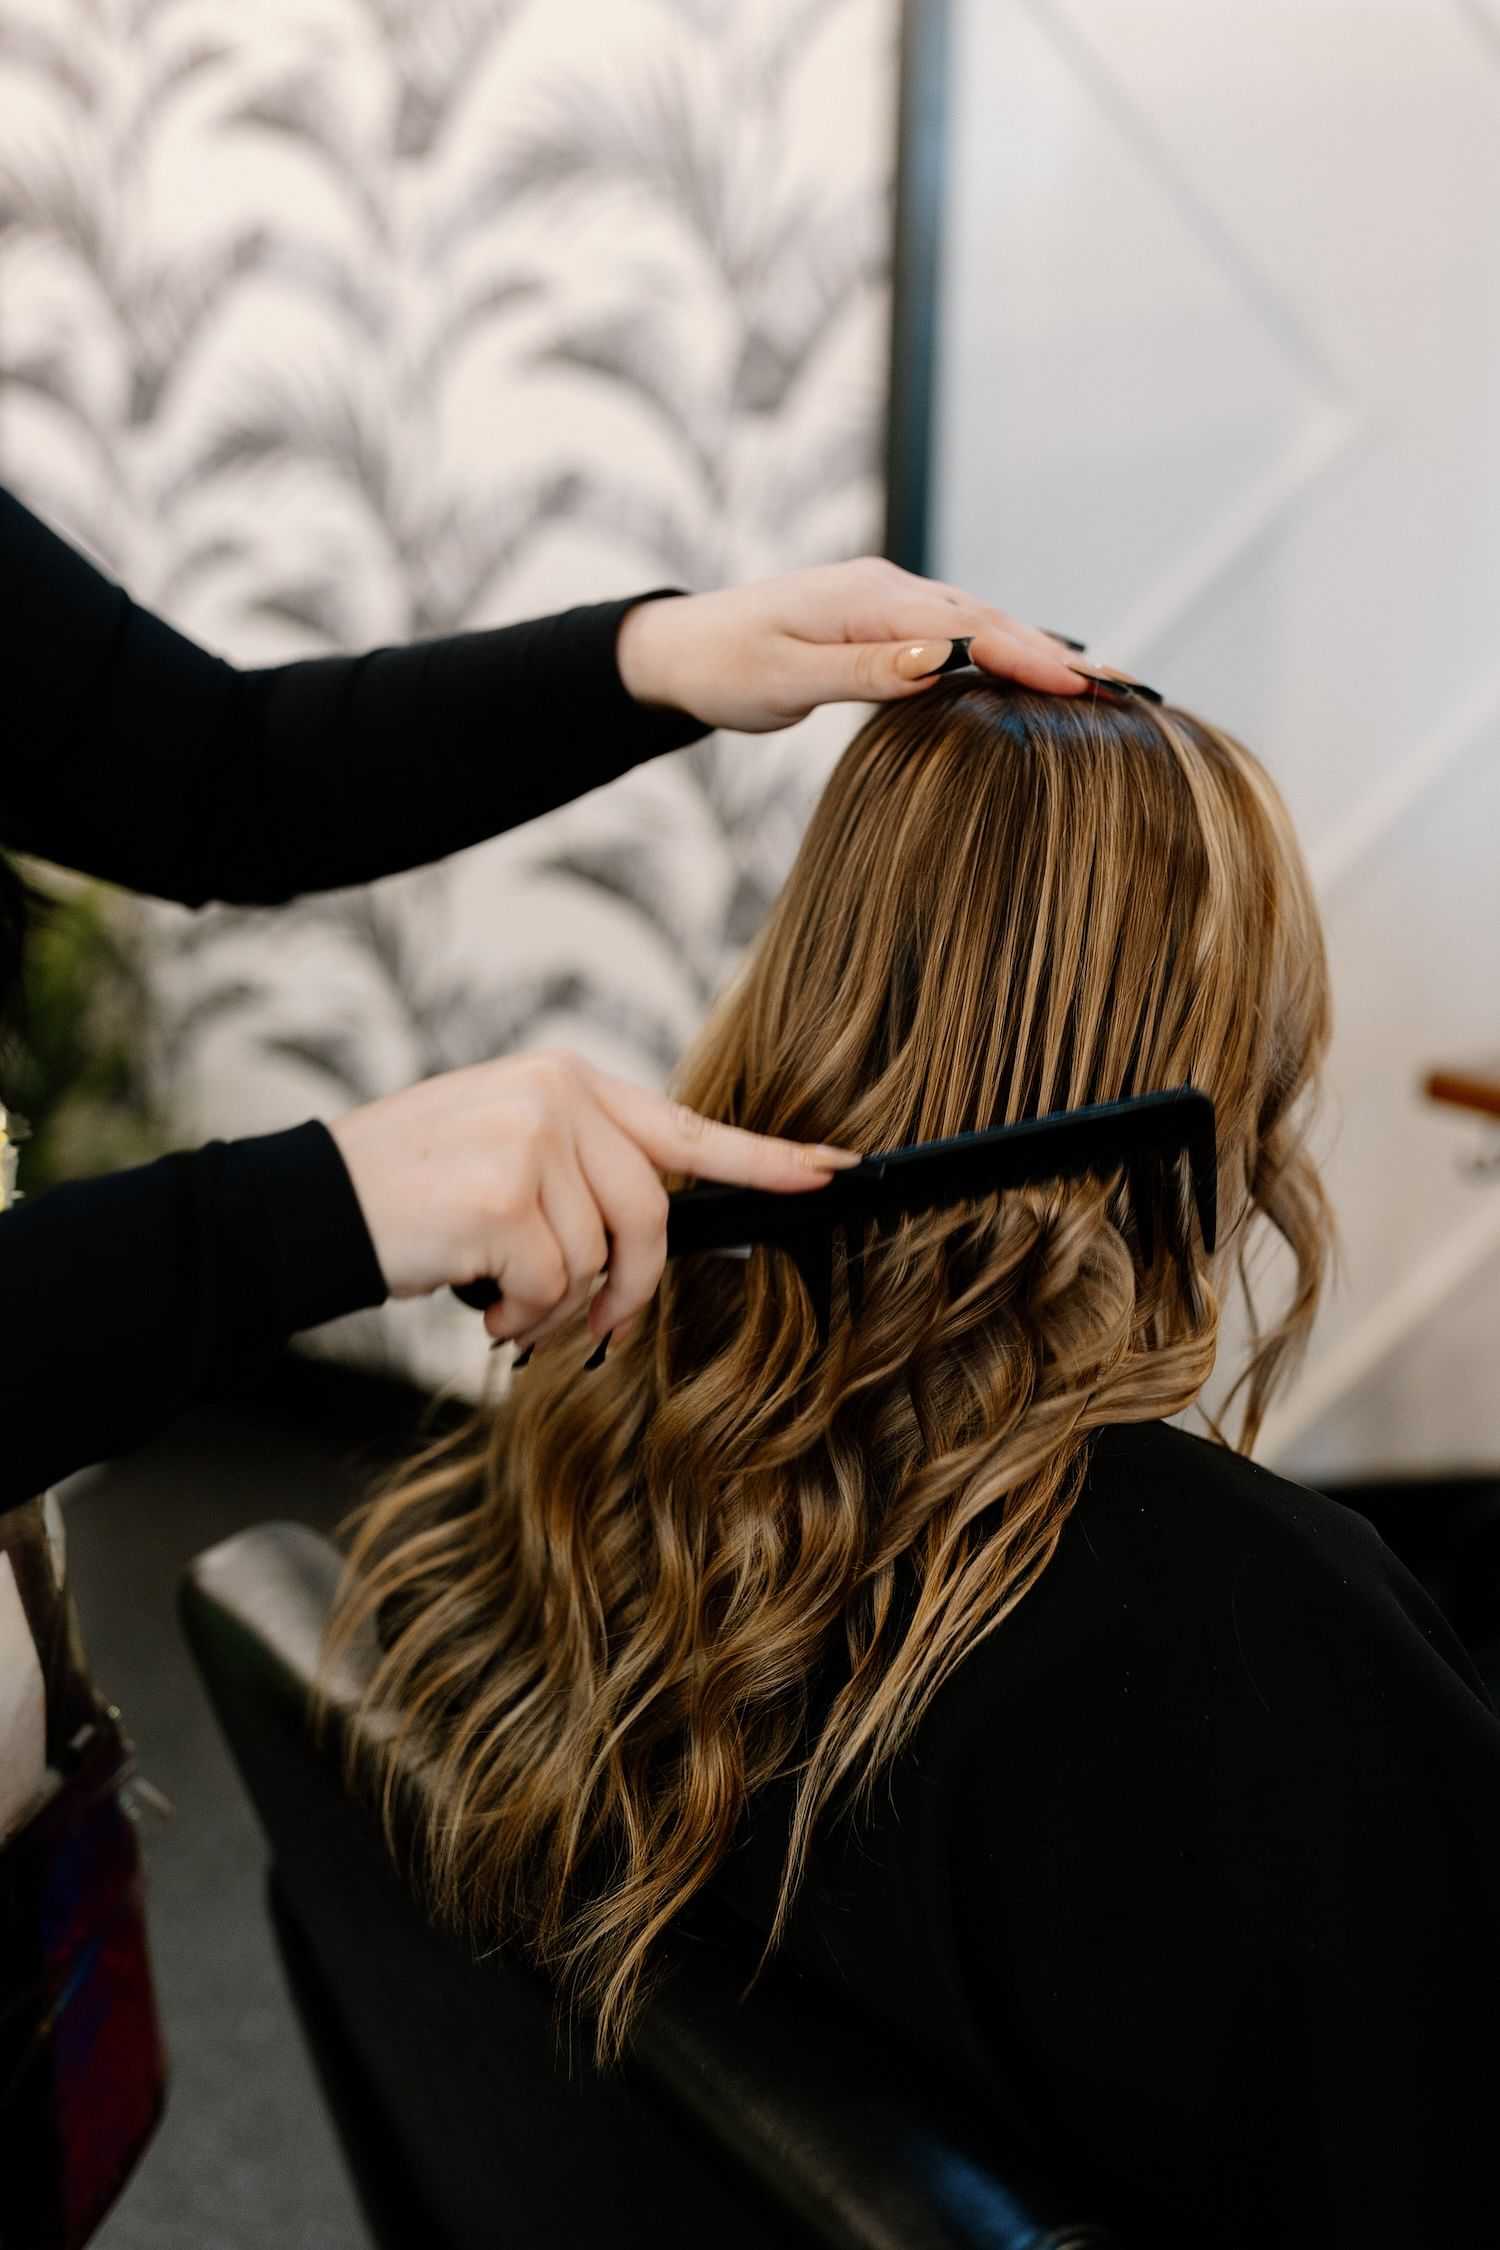 Stylist combing through wavy hair of a seated client in a salon.